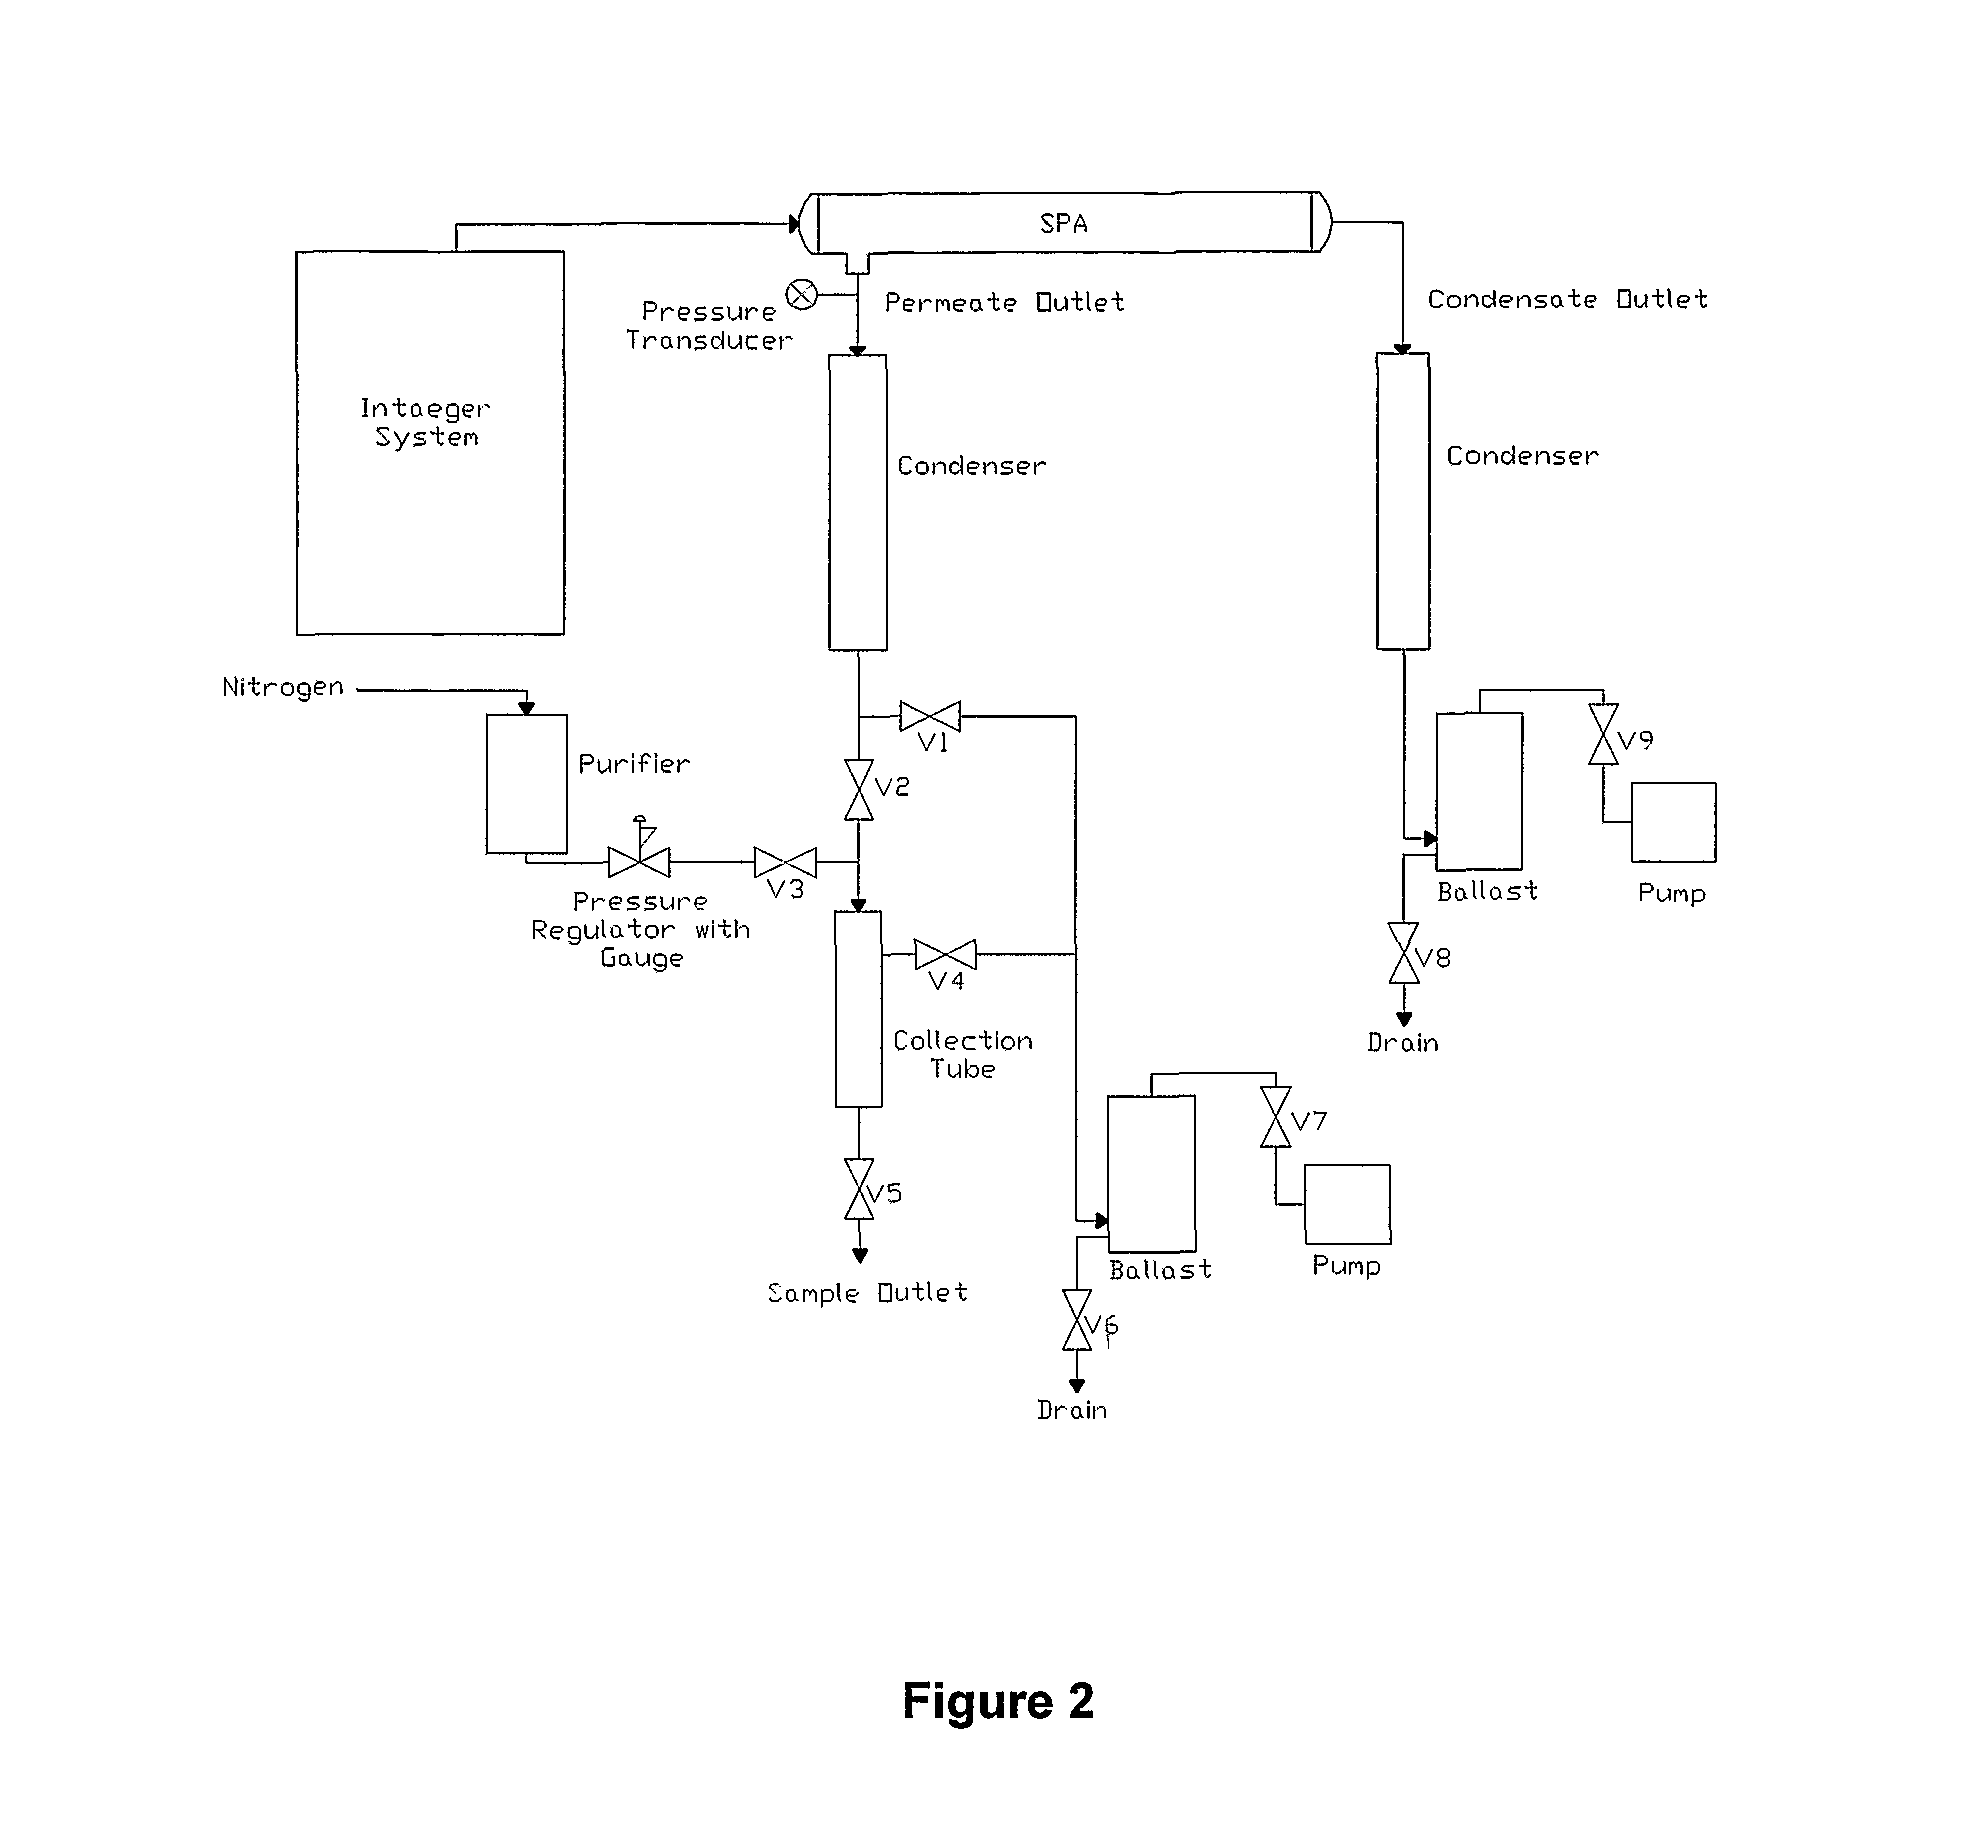 Method of producing high purity steam